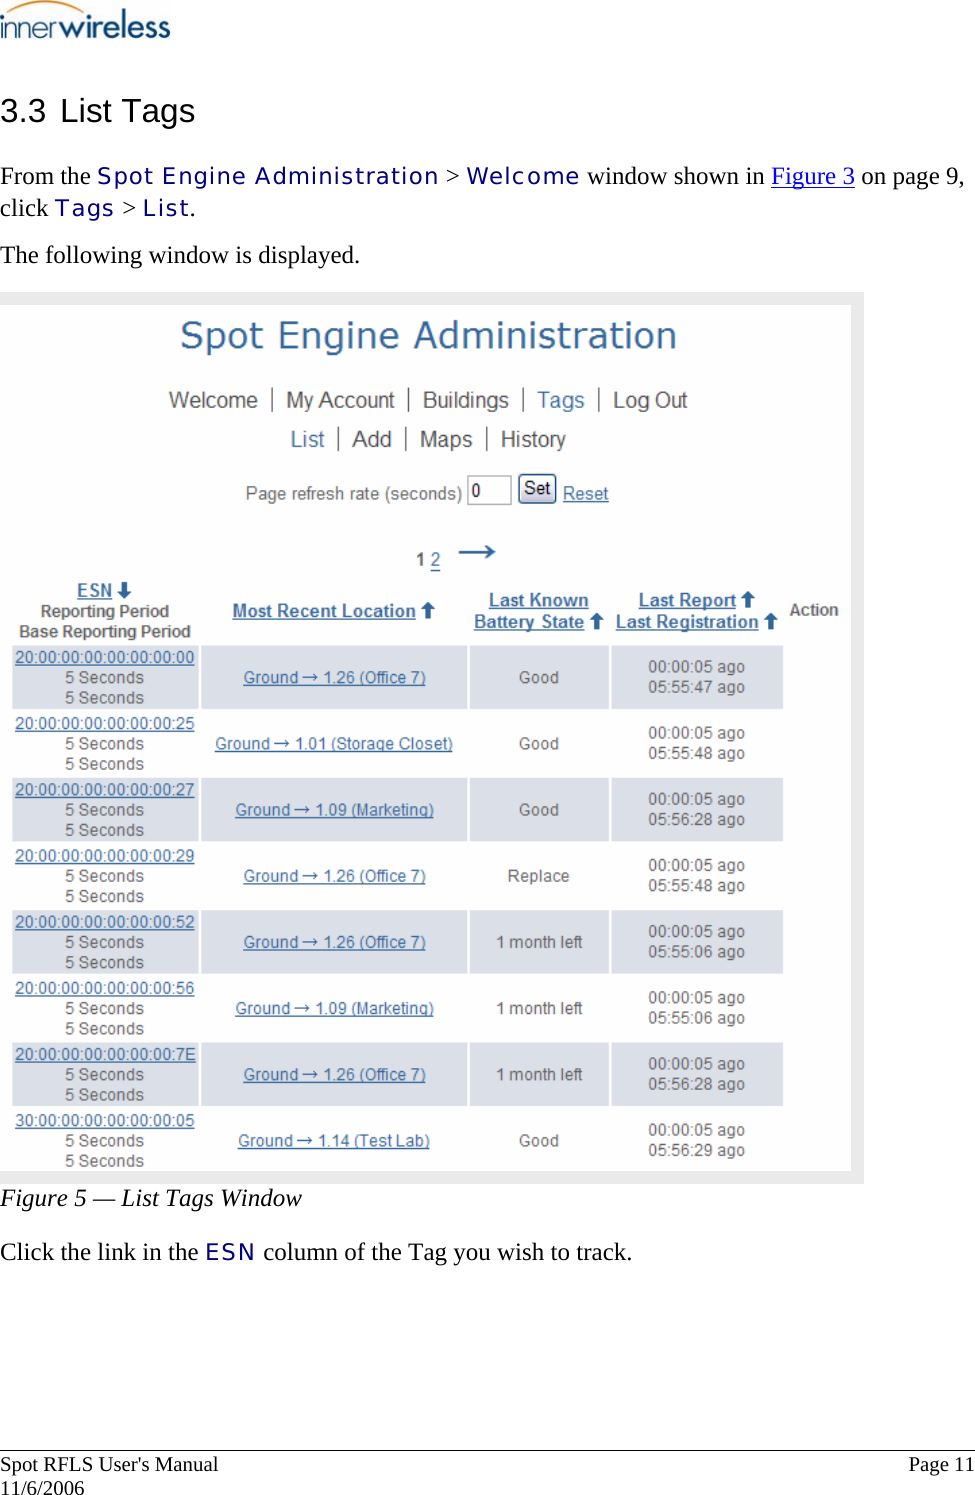       Spot RFLS User&apos;s Manual  Page 11   11/6/2006 3.3 List Tags From the Spot Engine Administration &gt; Welcome window shown in Figure 3 on page 9, click Tags &gt; List. The following window is displayed. Figure 5 — List Tags Window Click the link in the ESN column of the Tag you wish to track.  